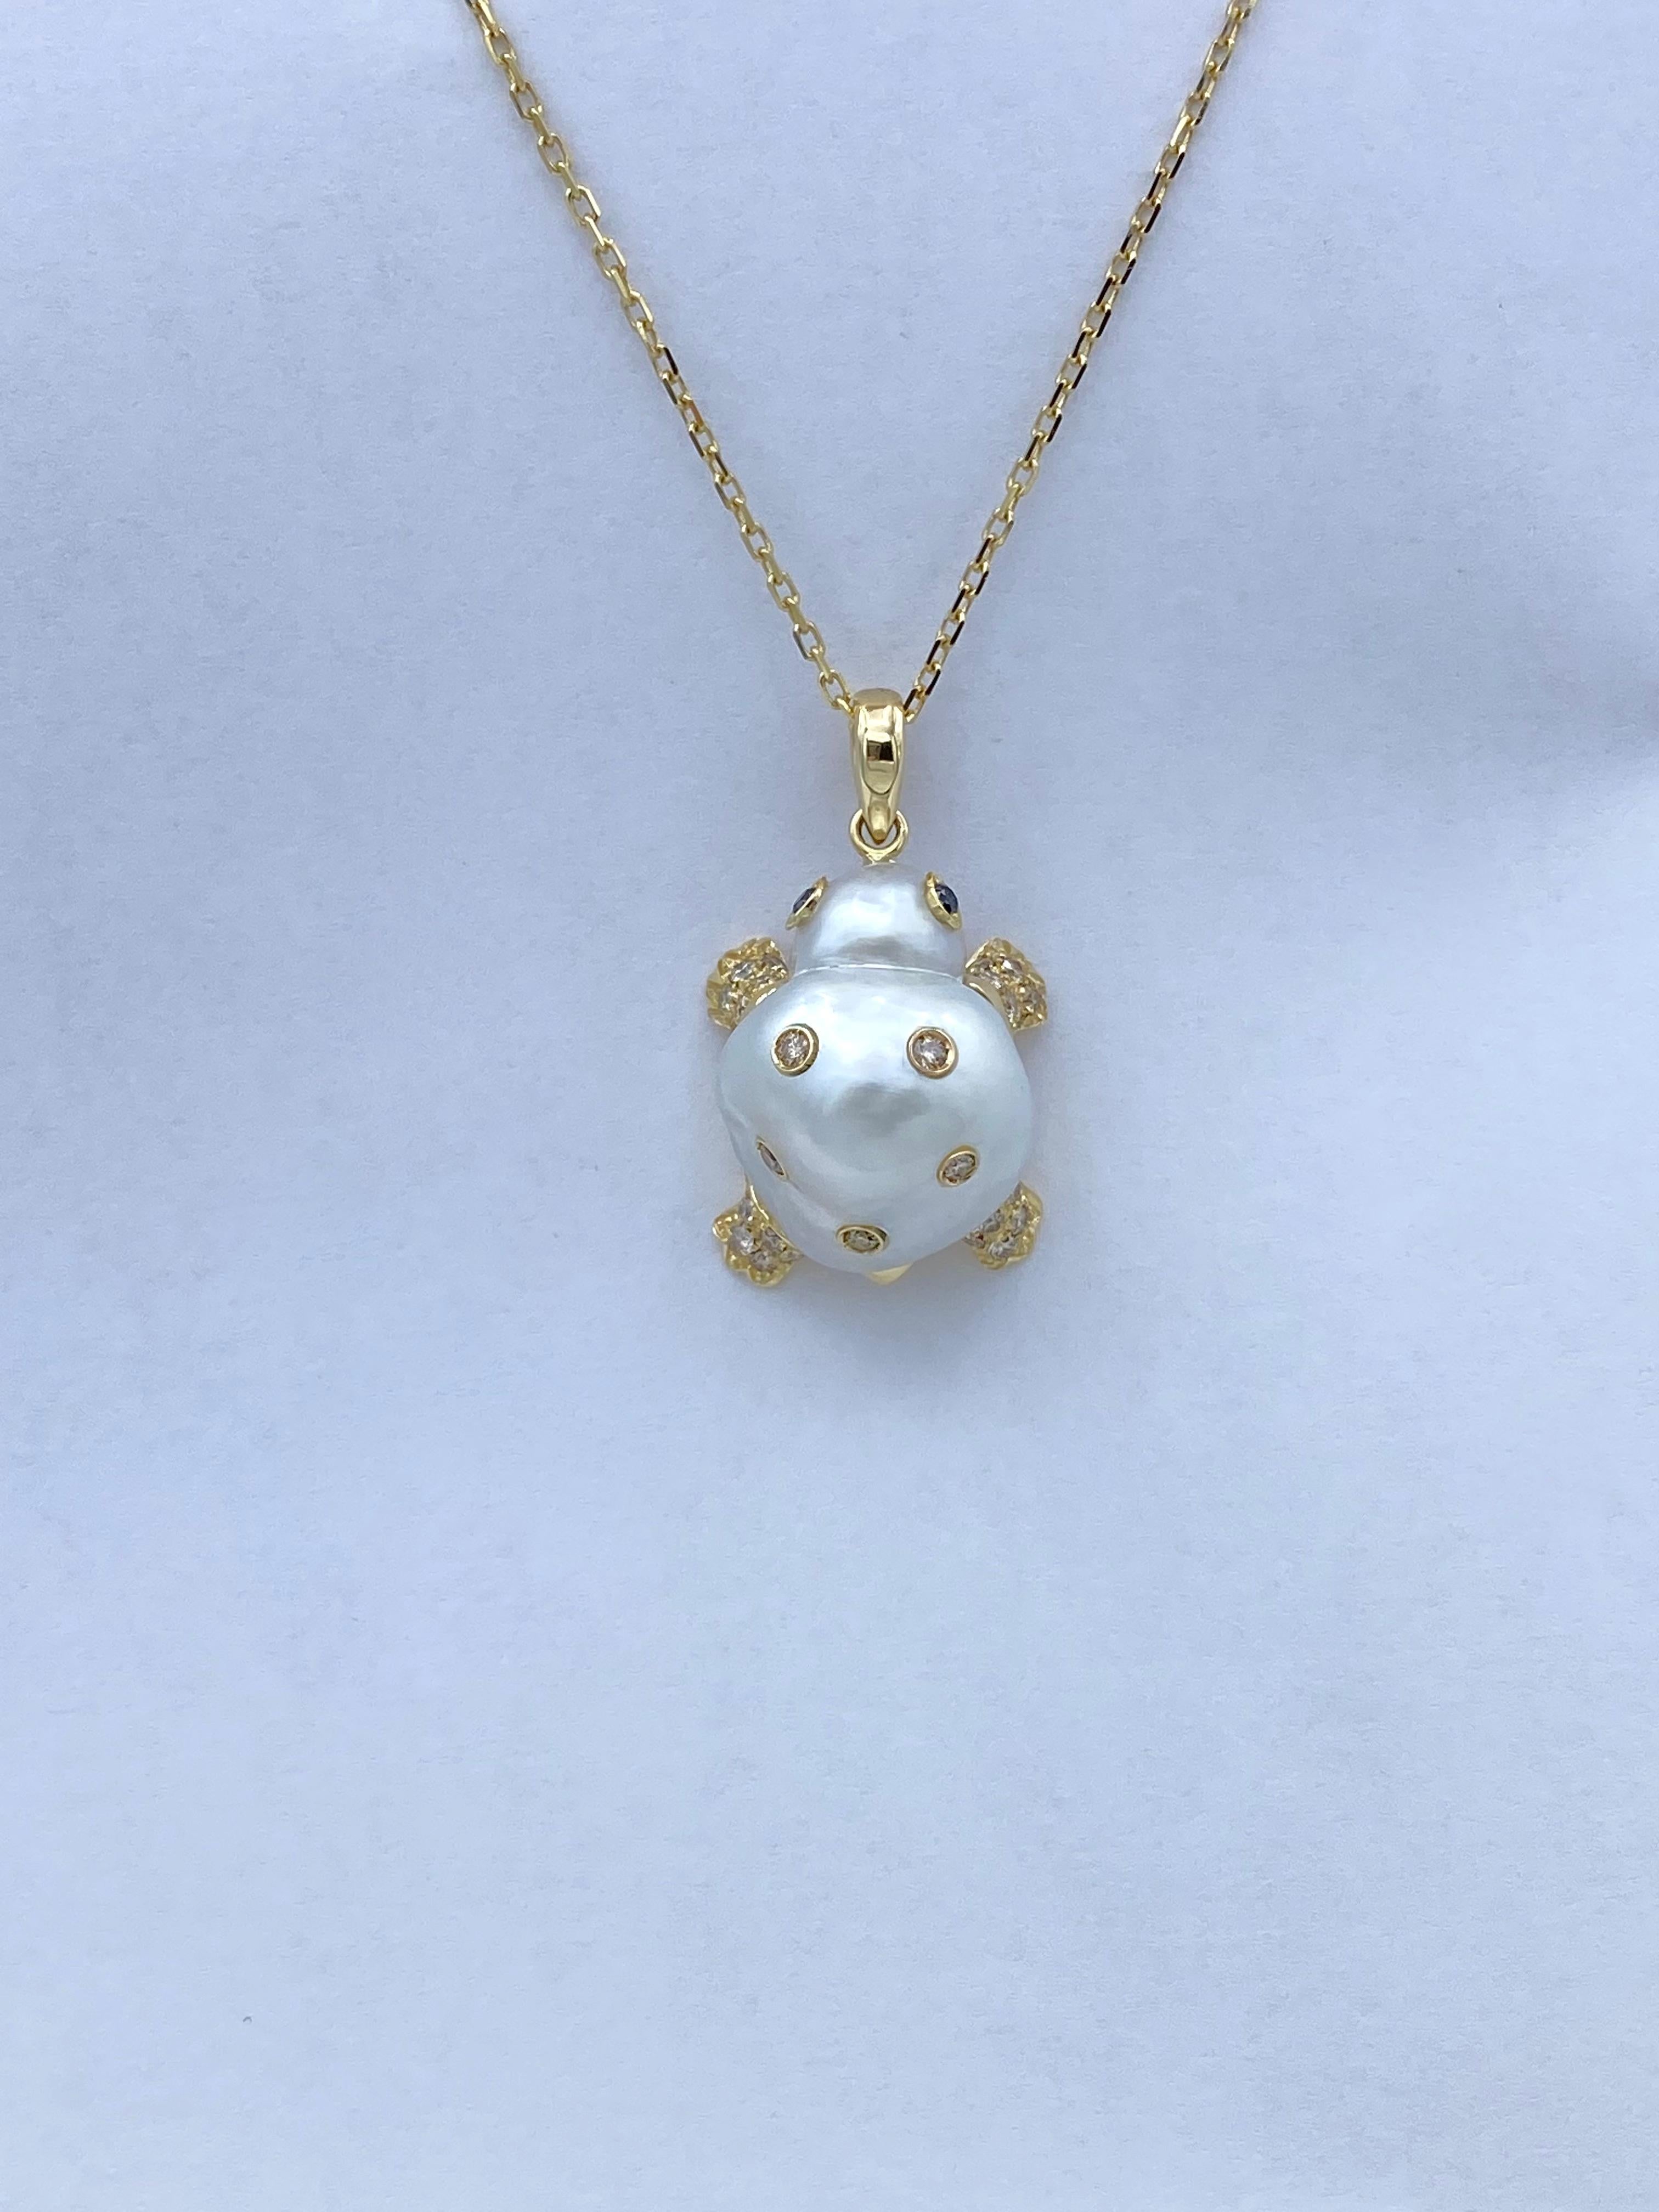 Turtle Brown Black Diamond 18Kt Gold Pendant/Necklace or Charm Handmade in Italy

I created this pendant using a 20x16mm Australian baroque pearl, which reminded me of a tortoise shell and its head. So I made the legs and the tail and I added the